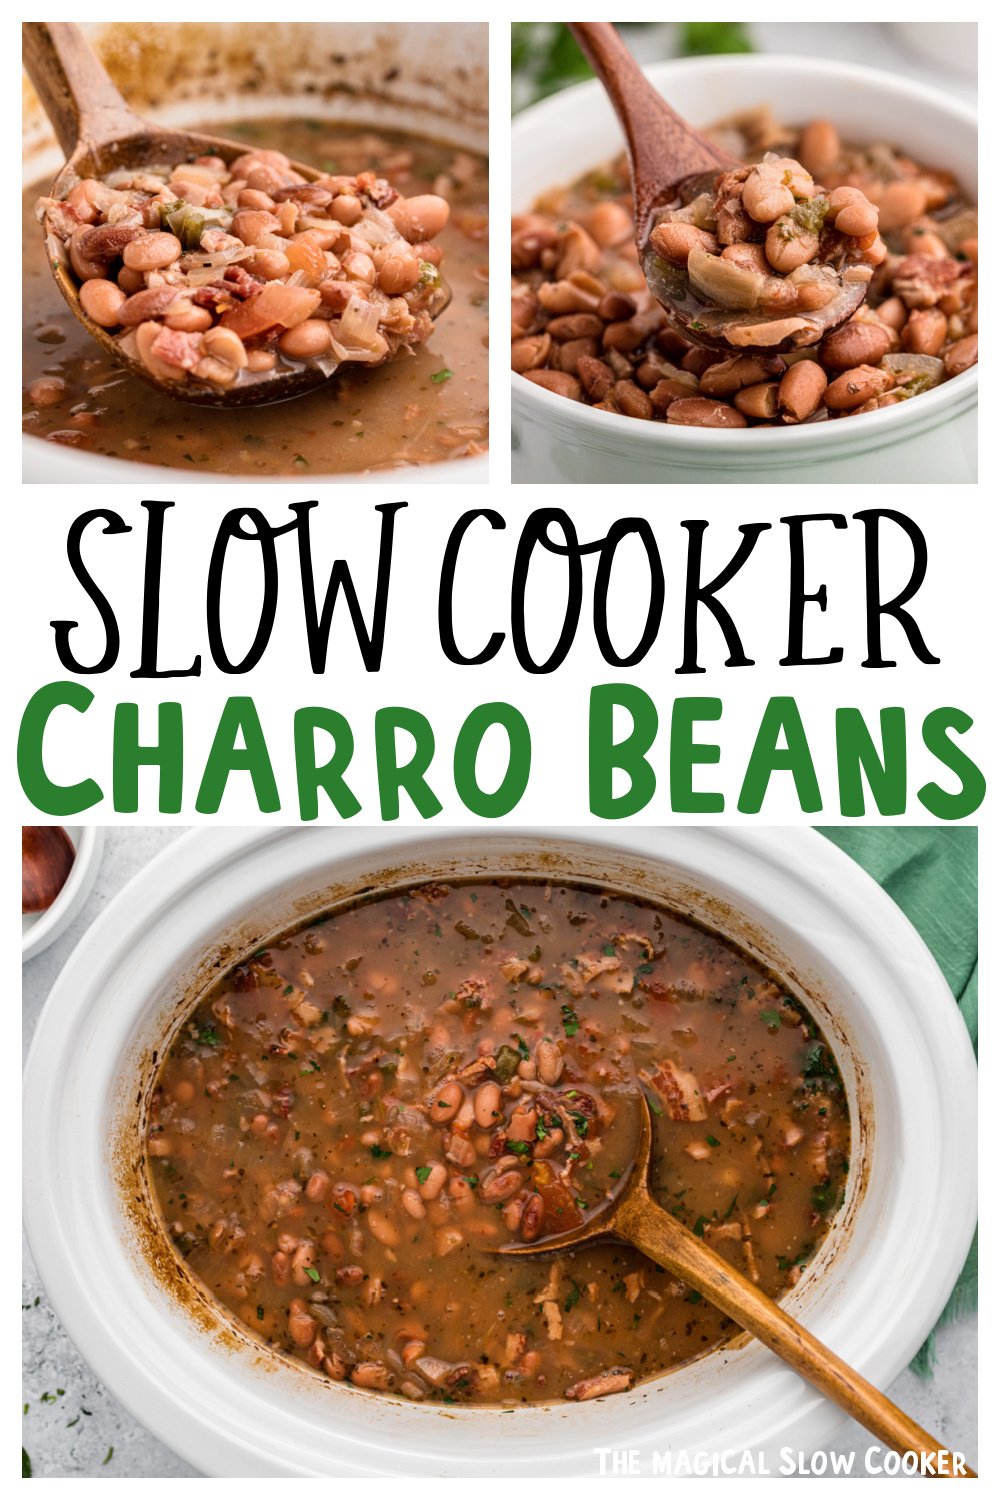 Slow Cooker Charro Beans - The Magical Slow Cooker